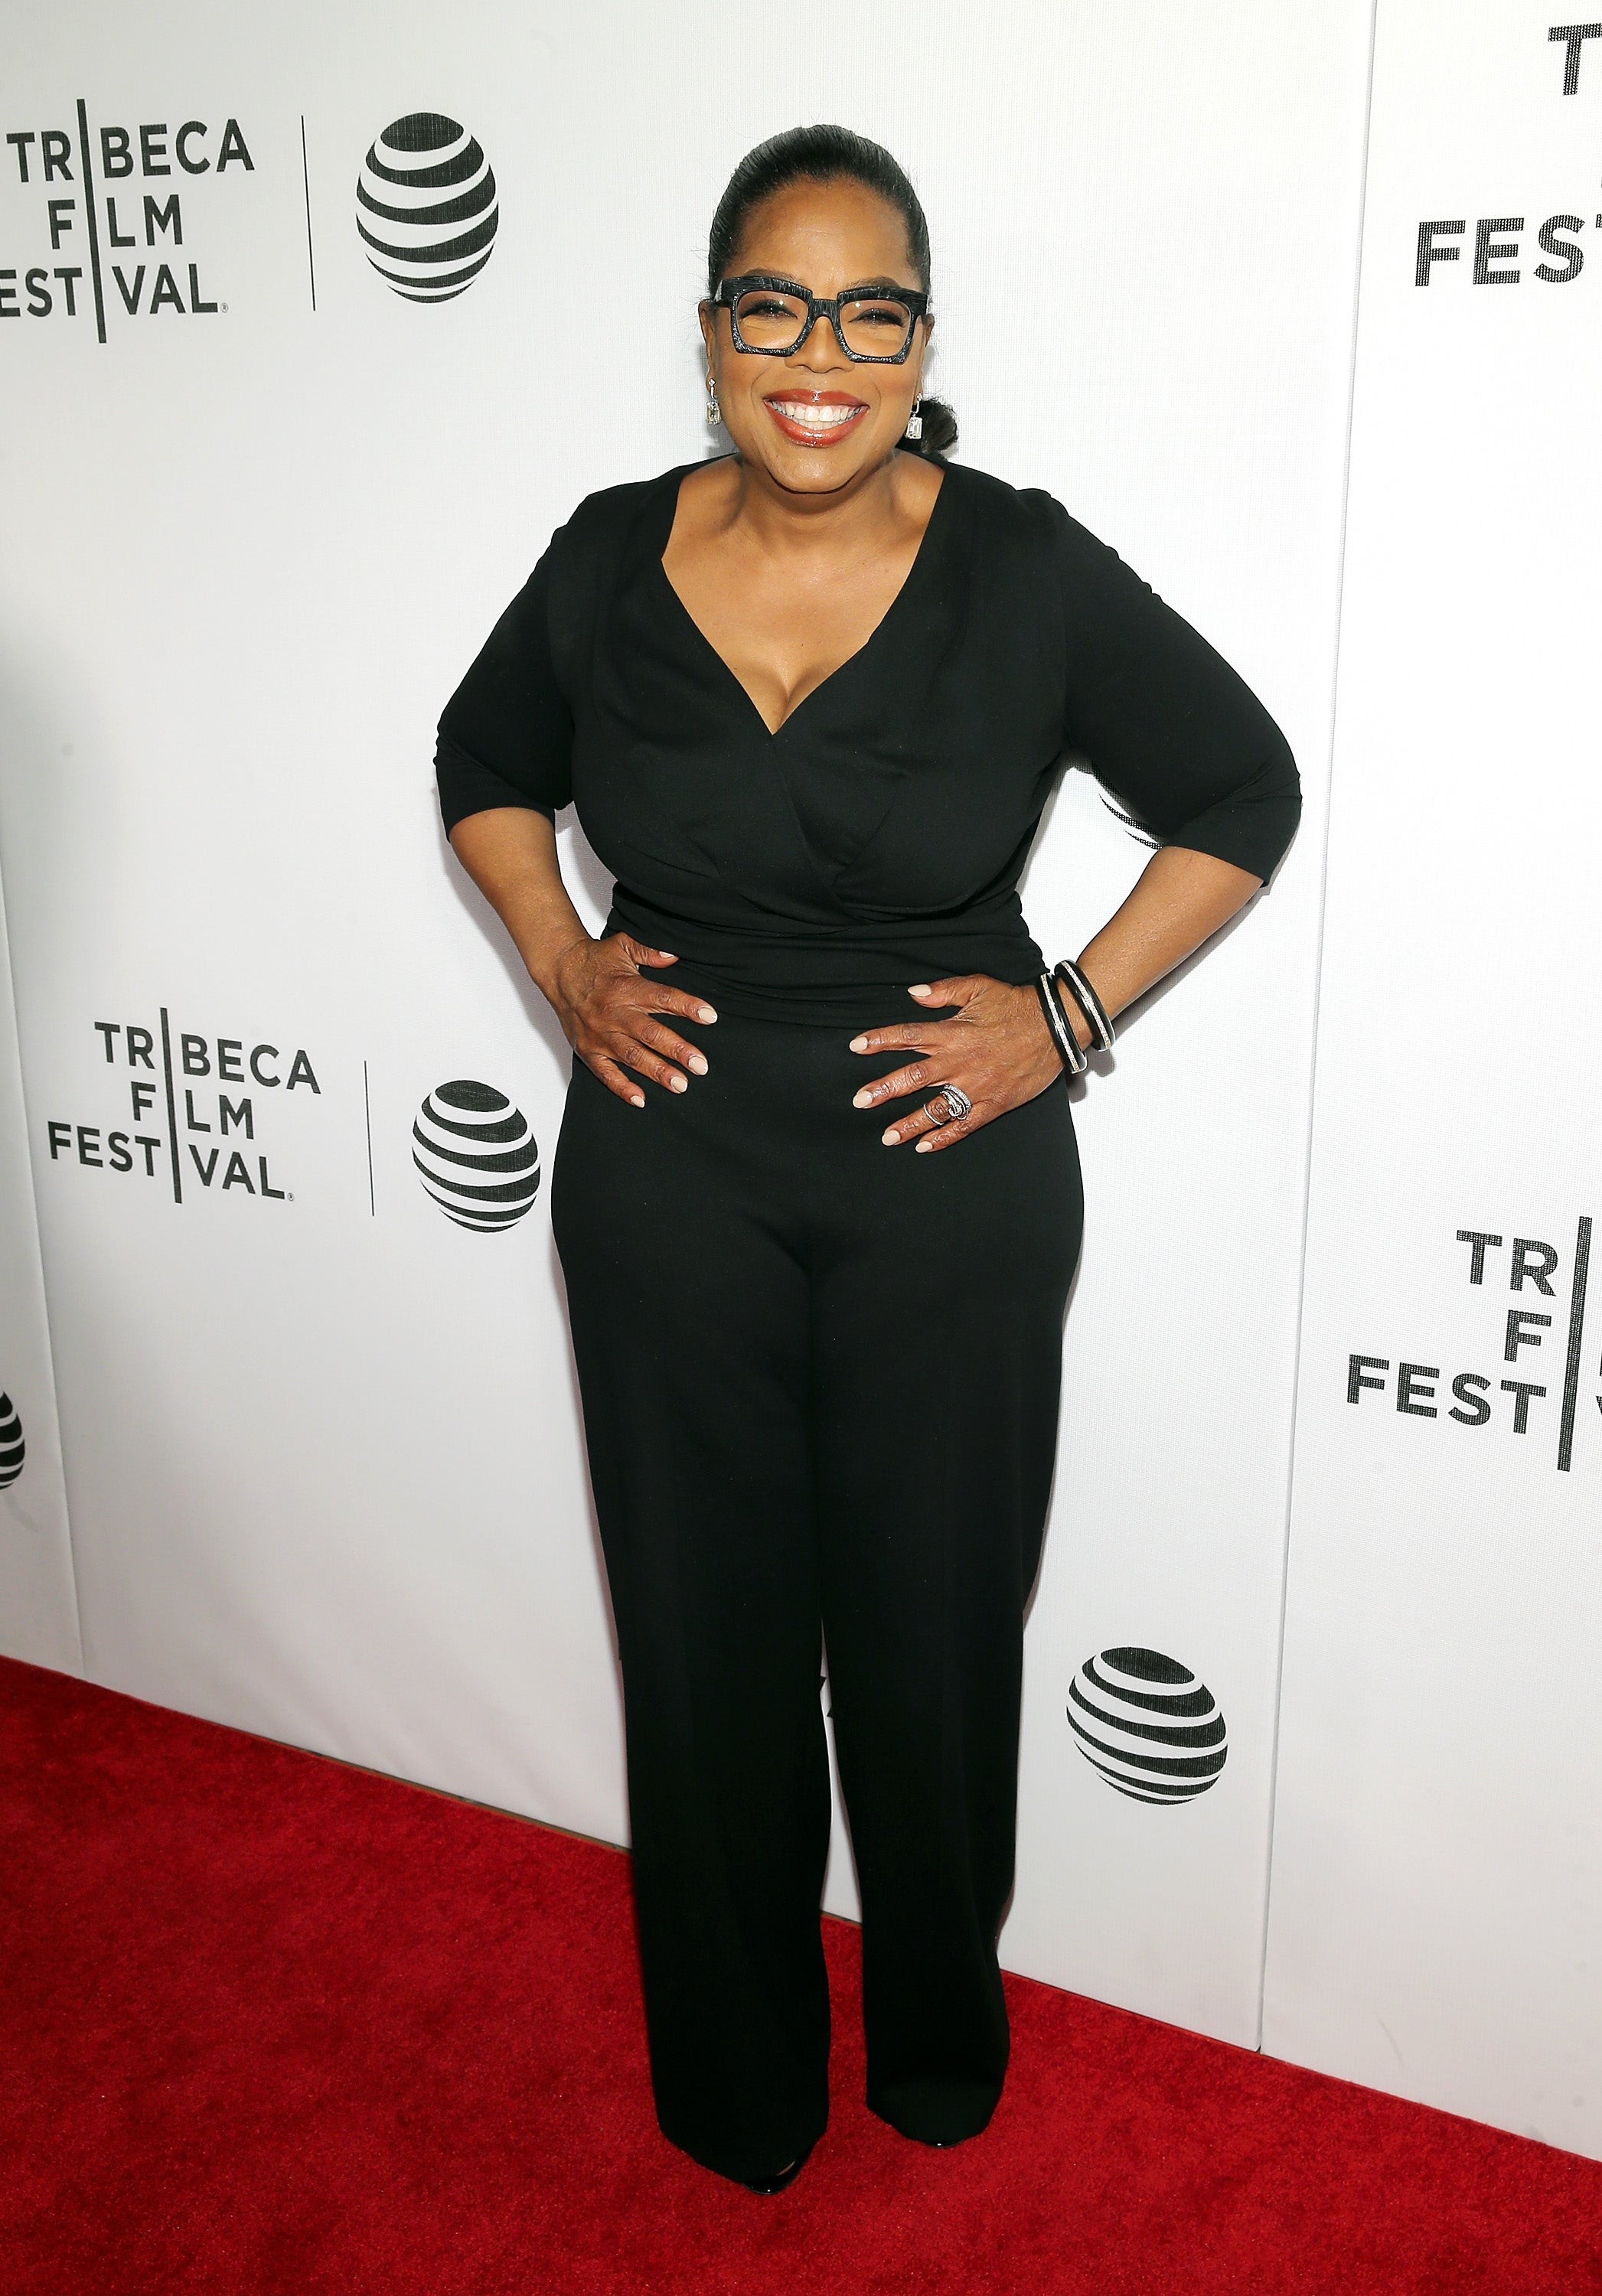 Oprah to Star and Produce 'The Immortal Life of Henrietta Lacks'
